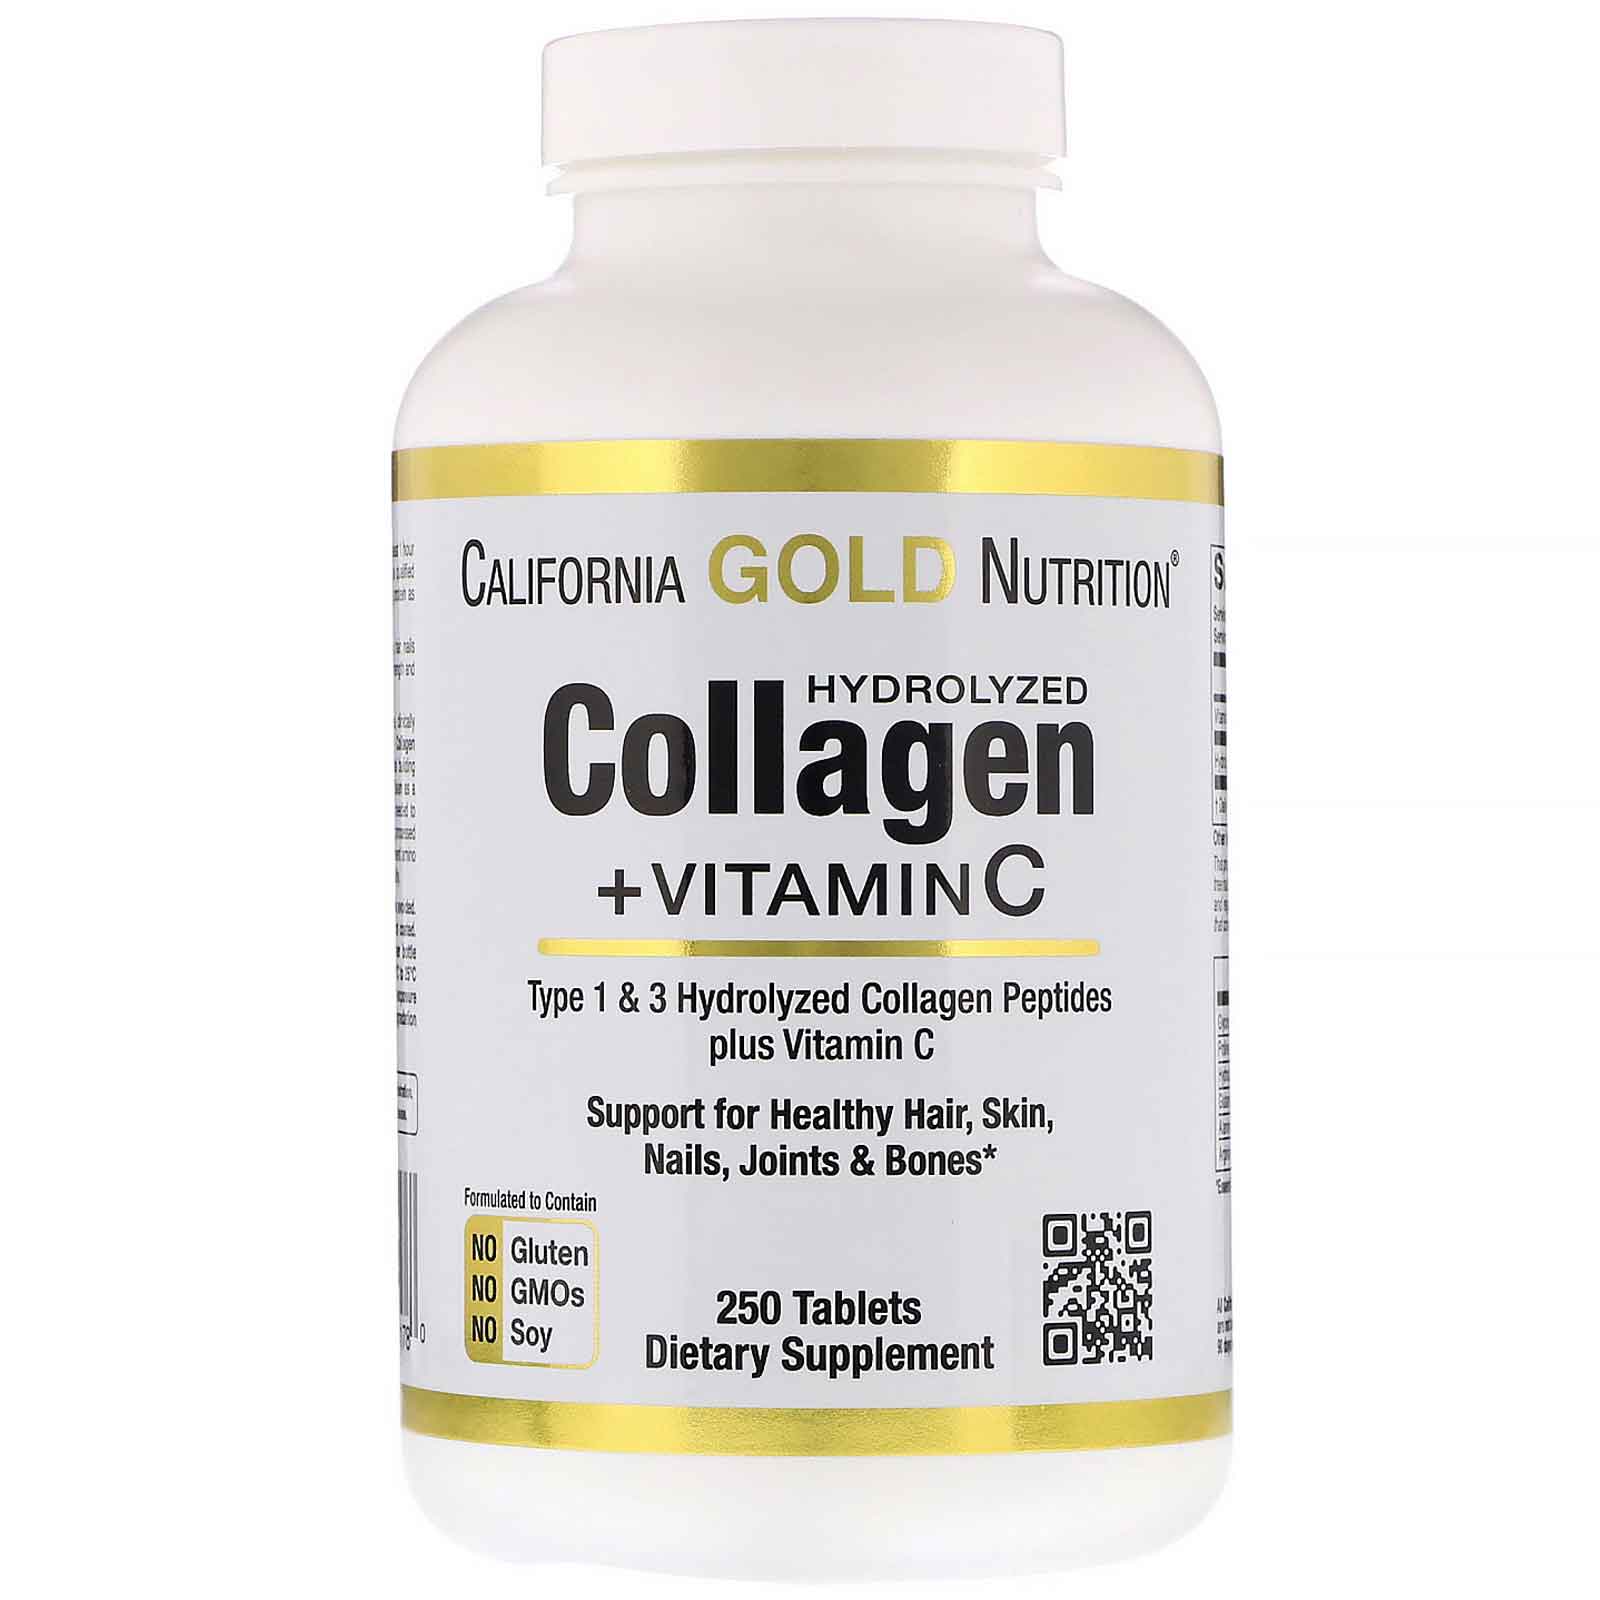 California Gold Nutrition Hydrolyzed Collagen Peptides